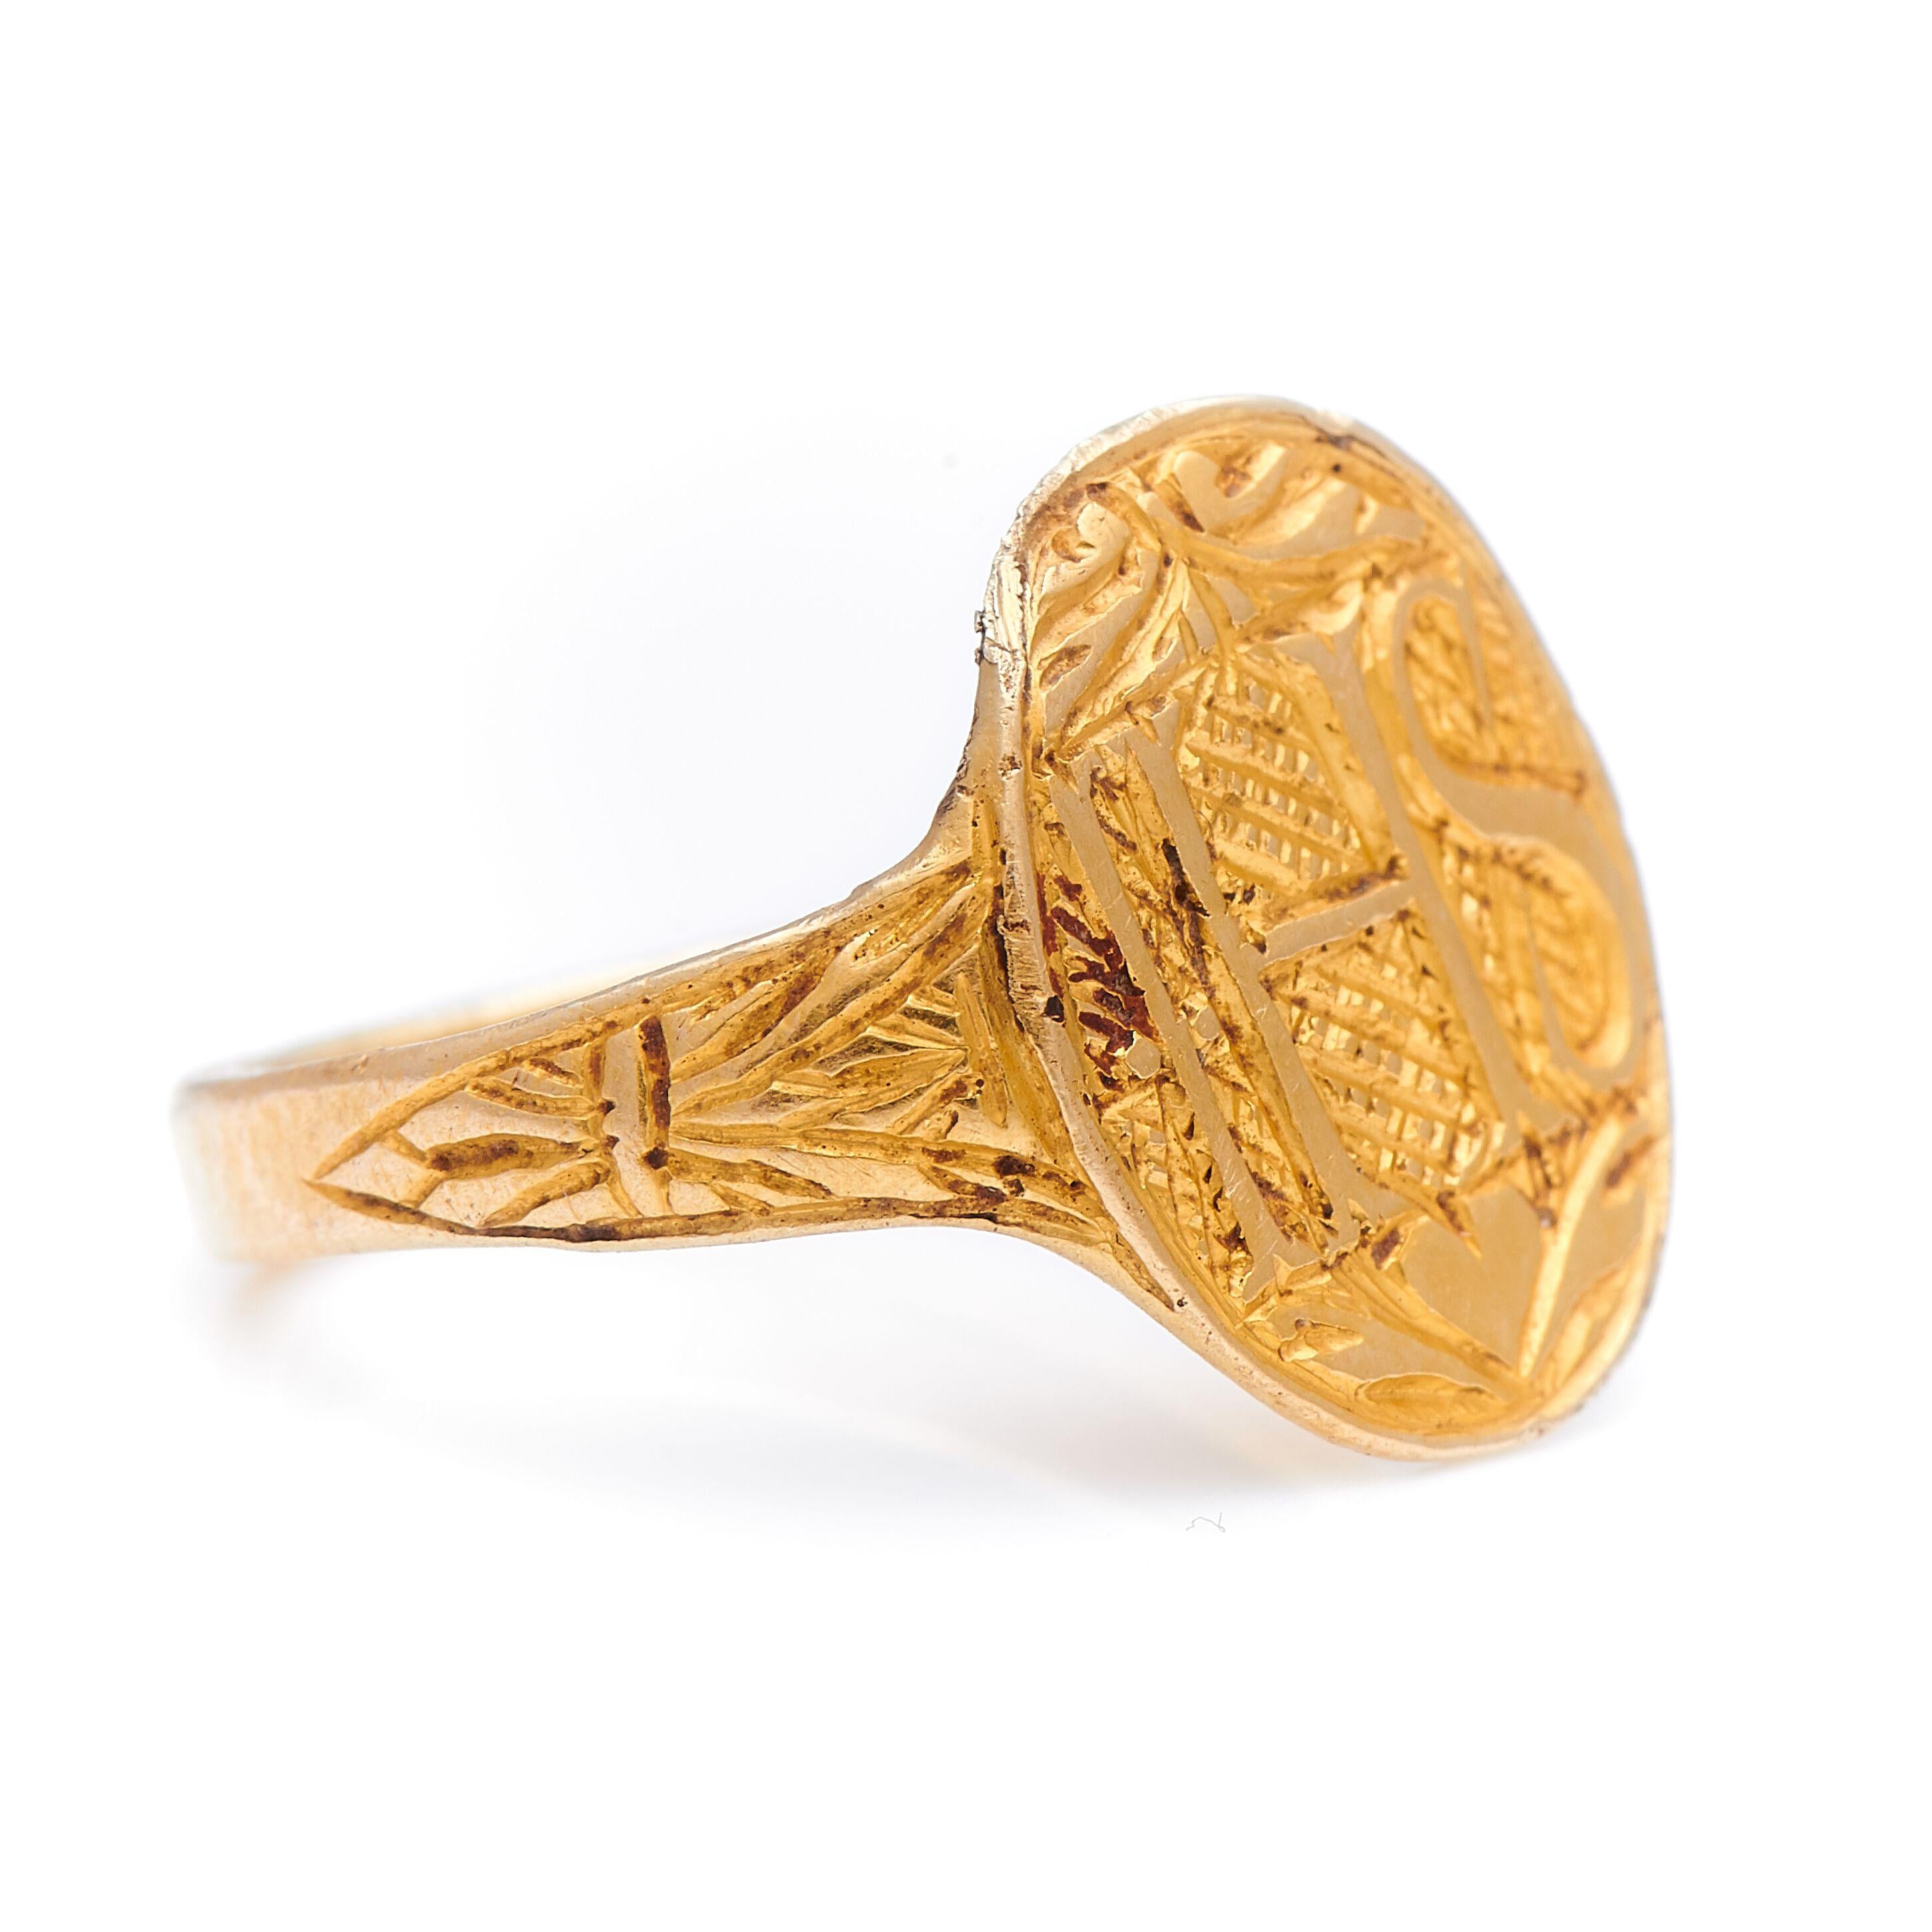 Early Christogram signet ring, 17th Century. An incredible signet ring carved with the ‘IHS’ signifying devotion to Christ. A rare survival, this wonderful piece of history remains in remarkable condition. The carvings have been well preserved;